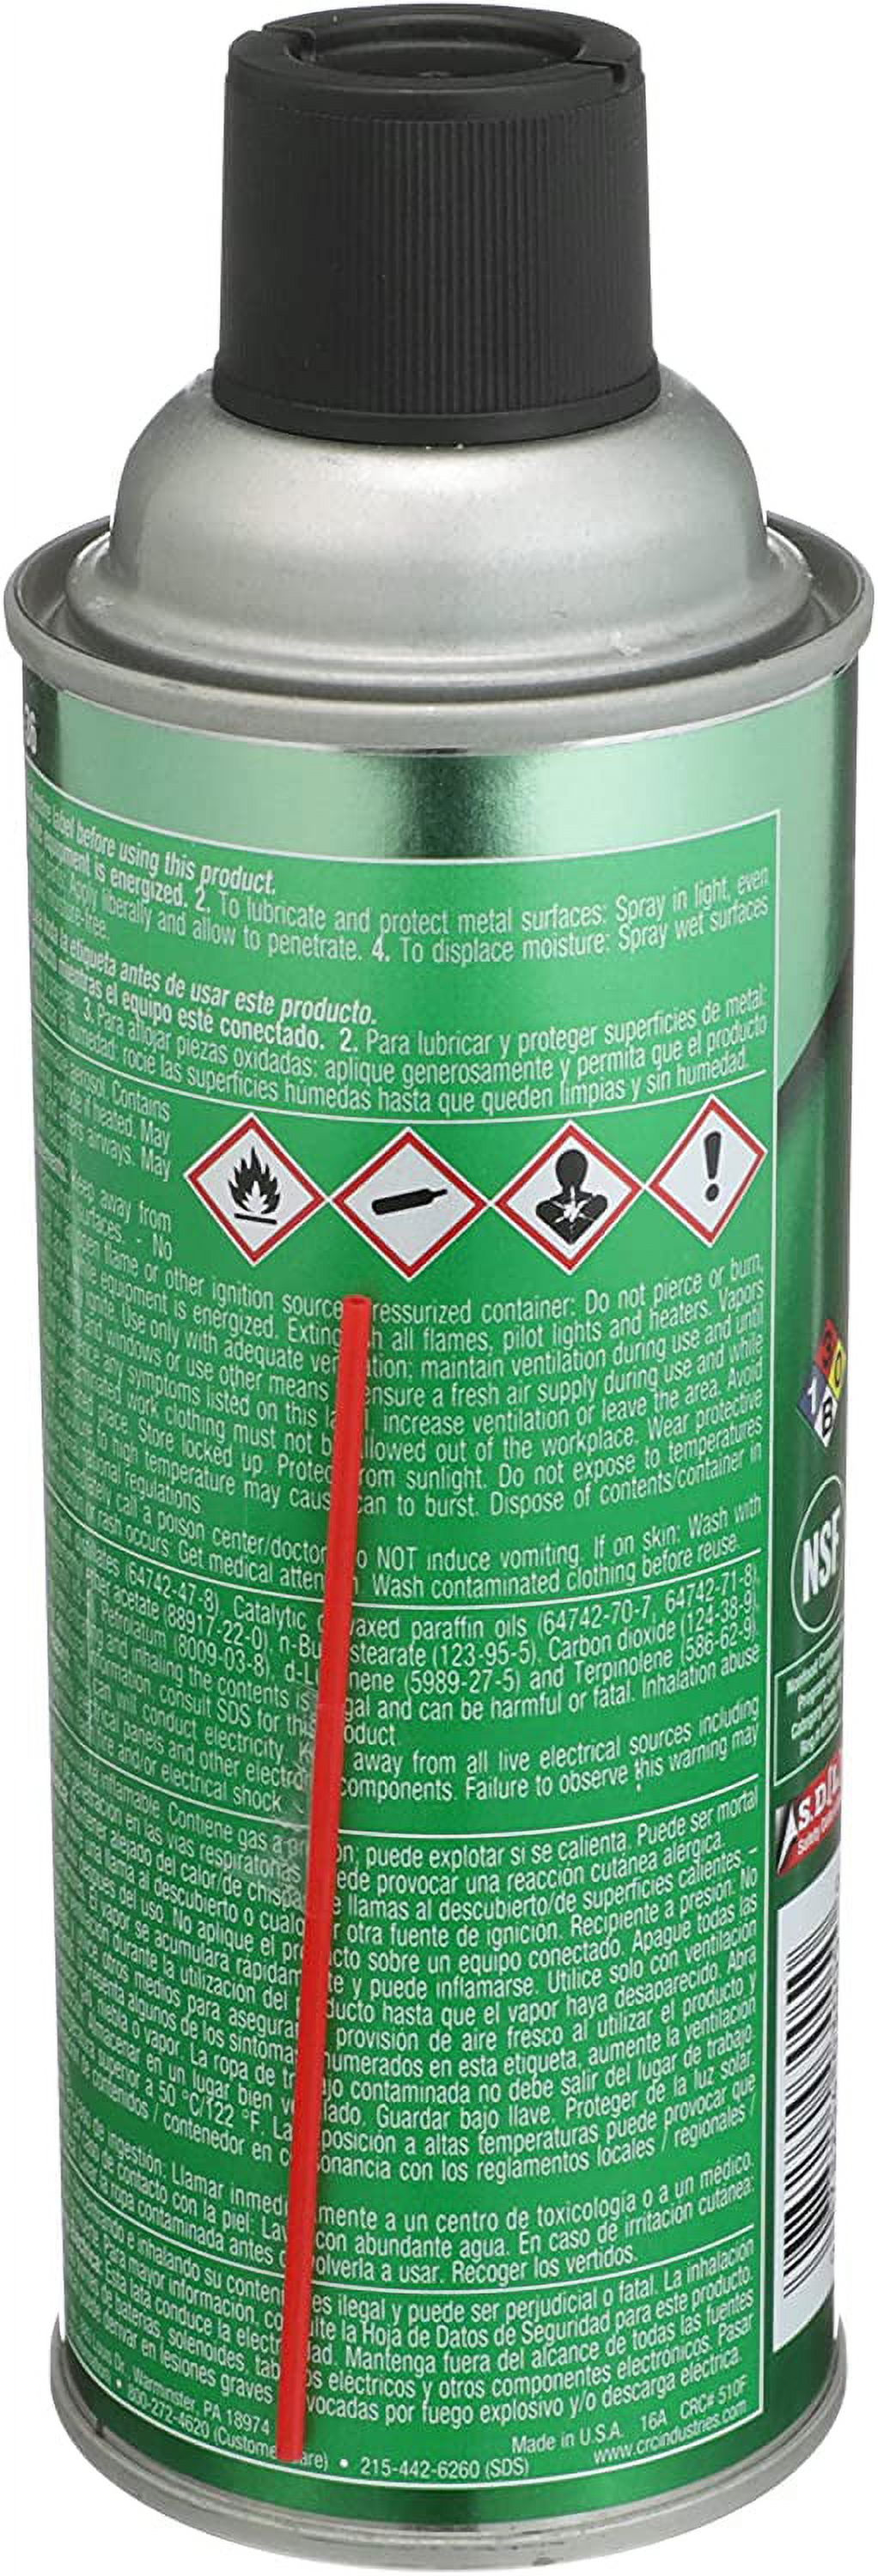 CRC 3-36 Multi-Purpose Lubricant and Corrosion Inhibitor, 11 oz Aerosol Can, Clear/Blue/Green - image 3 of 10